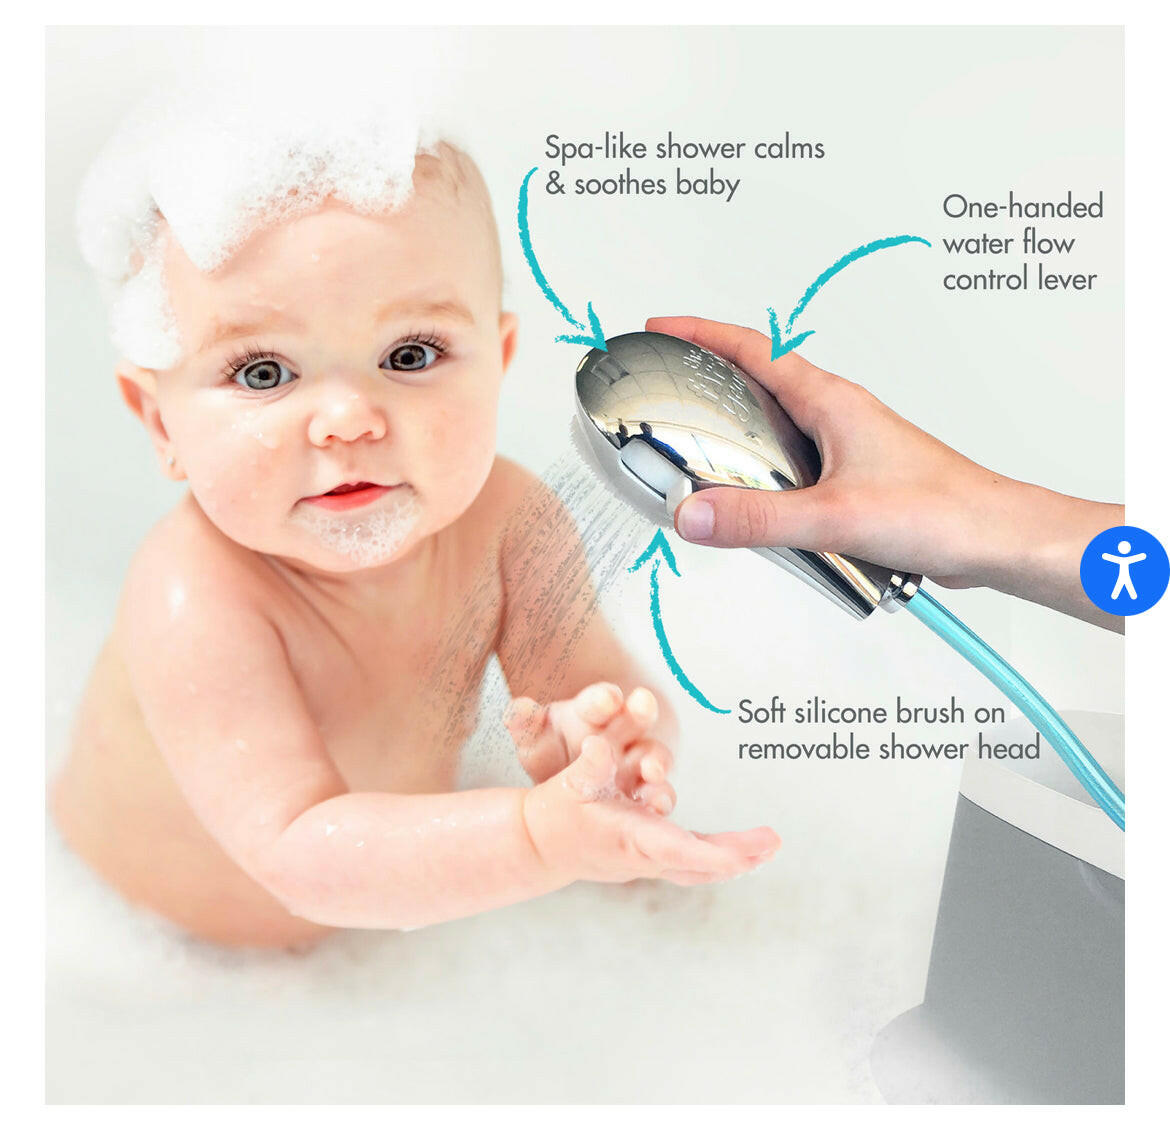 The First Years Rain Shower Baby Spa with Soothing Spray Showerhead.